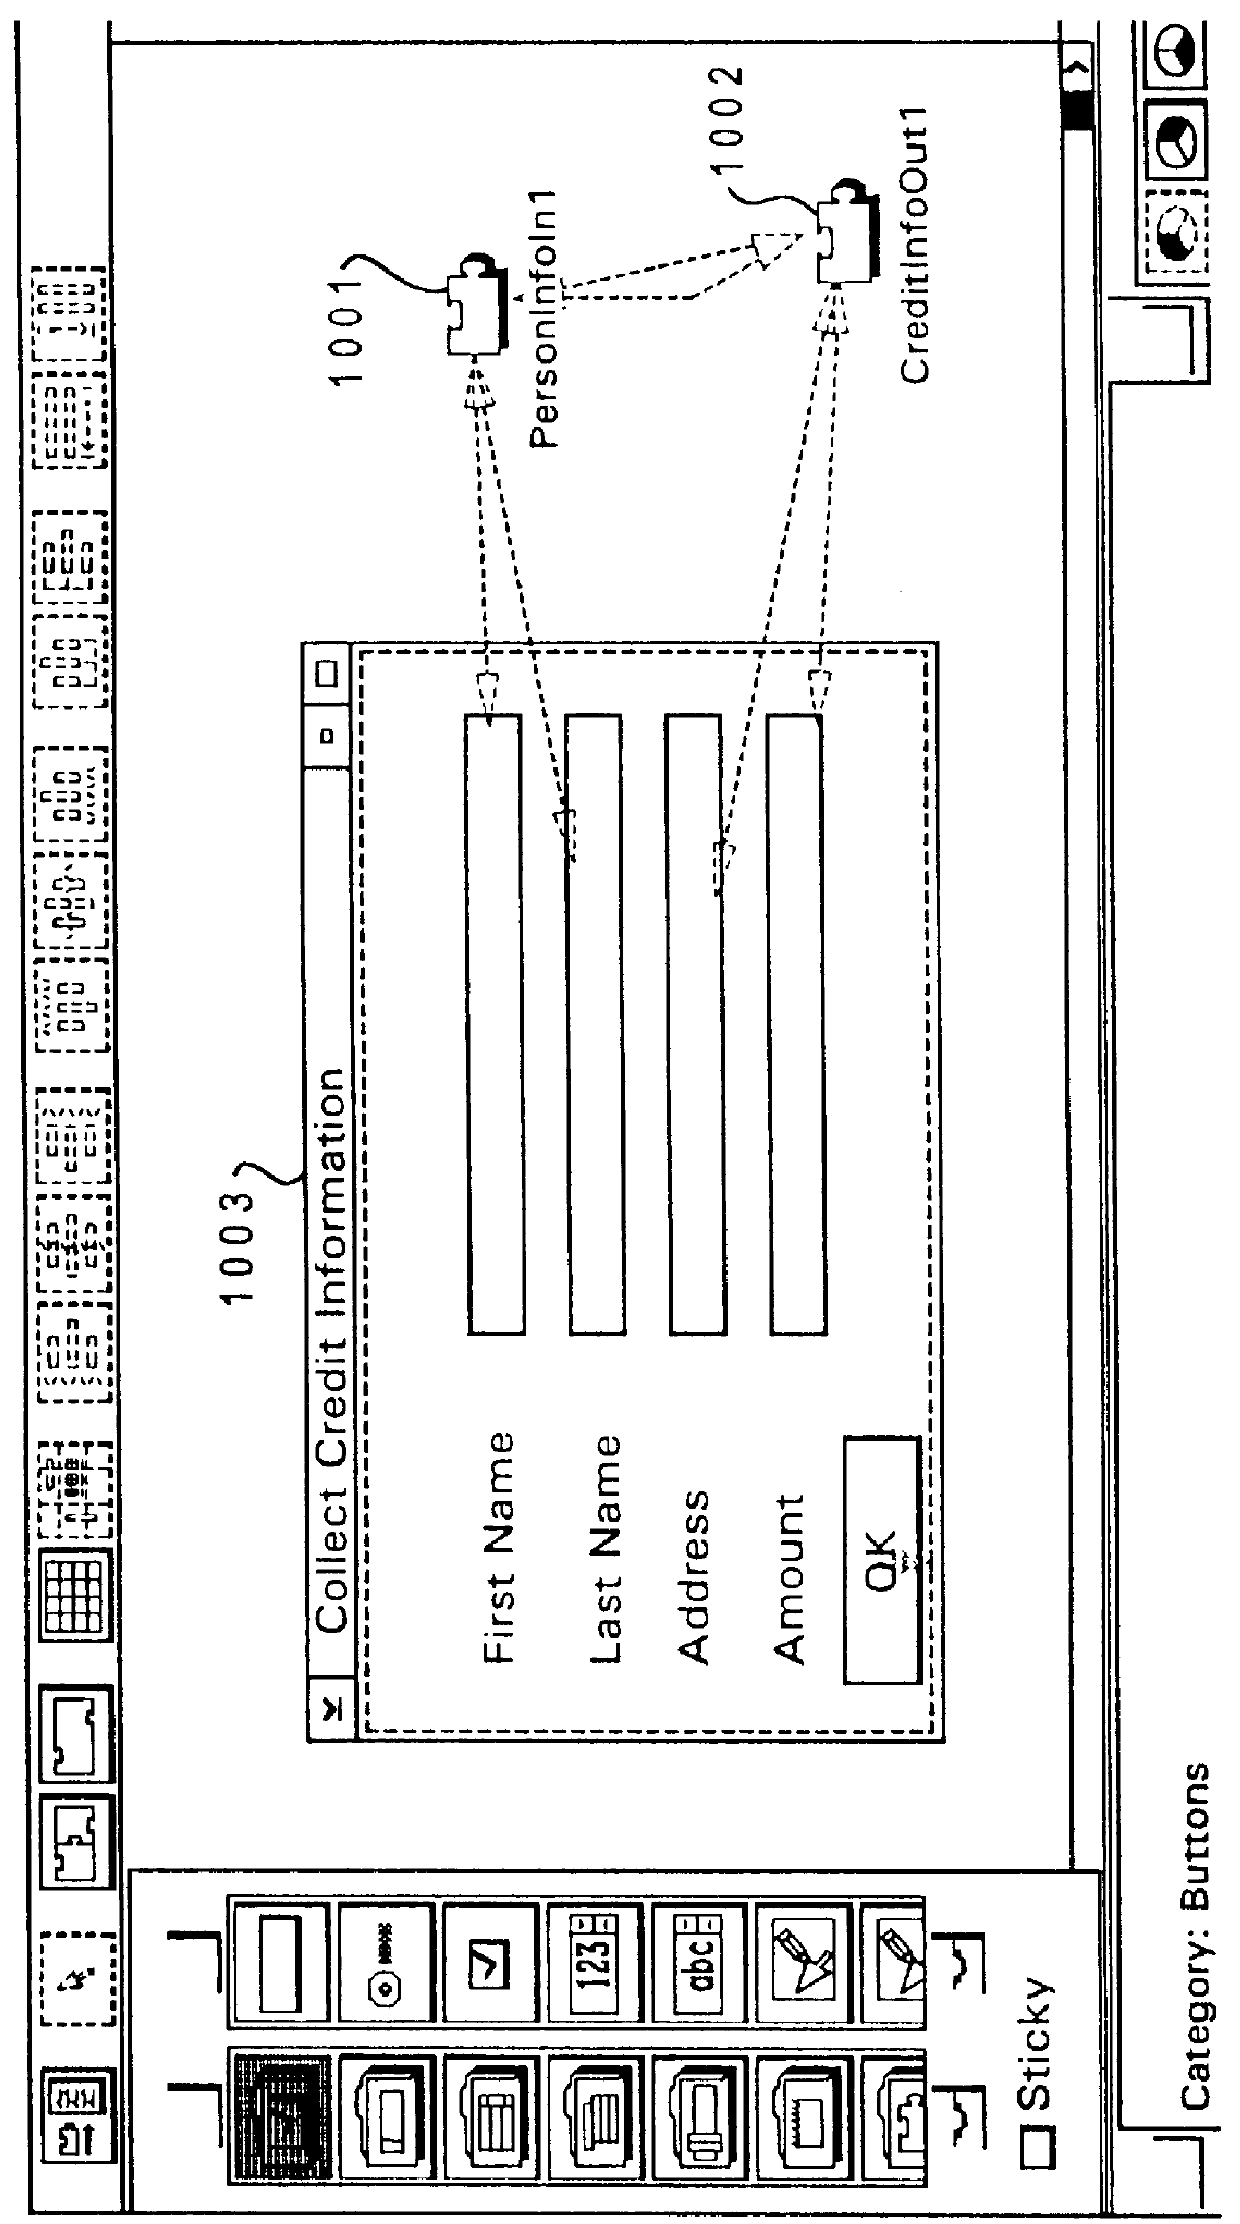 Method of generating an implementation of reusable parts from containers of a workflow process-model